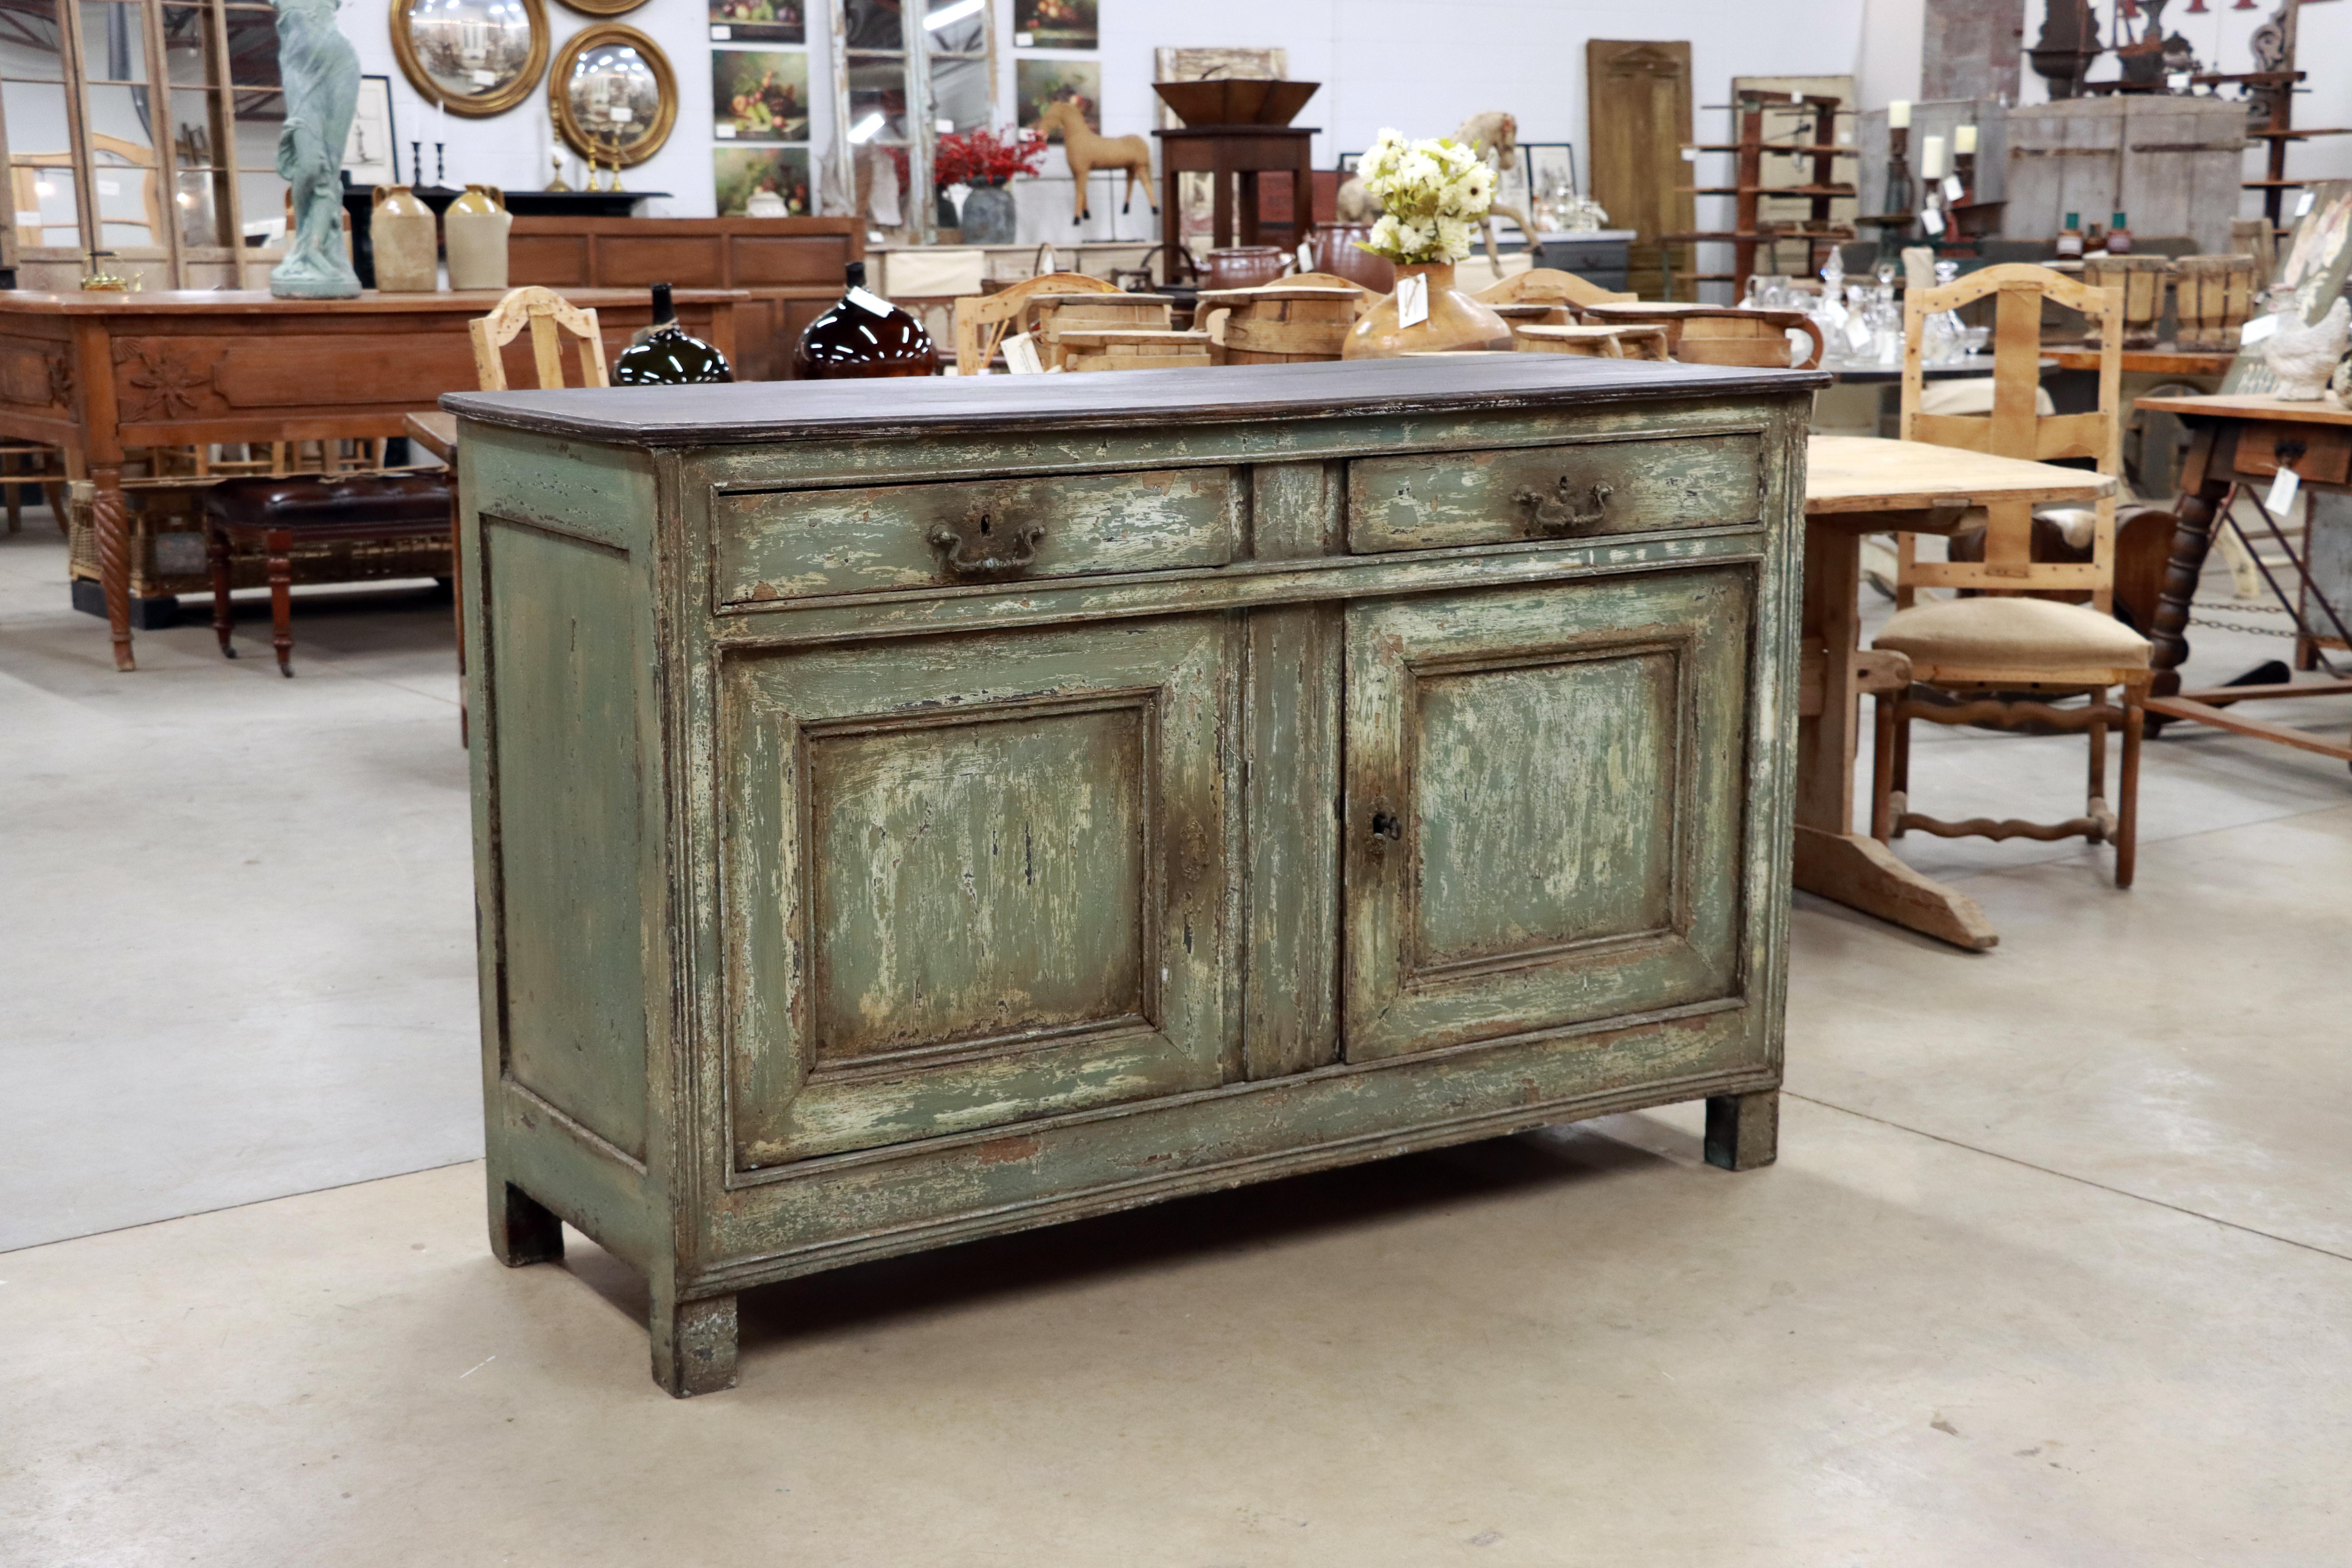 Substantial antique painted 2 door over 2 drawer oak buffet with silverware compartment.

Very beautiful green distressed painted finish with black top.

This lovely piece of furniture would work in many rooms including kitchen, dining room, living